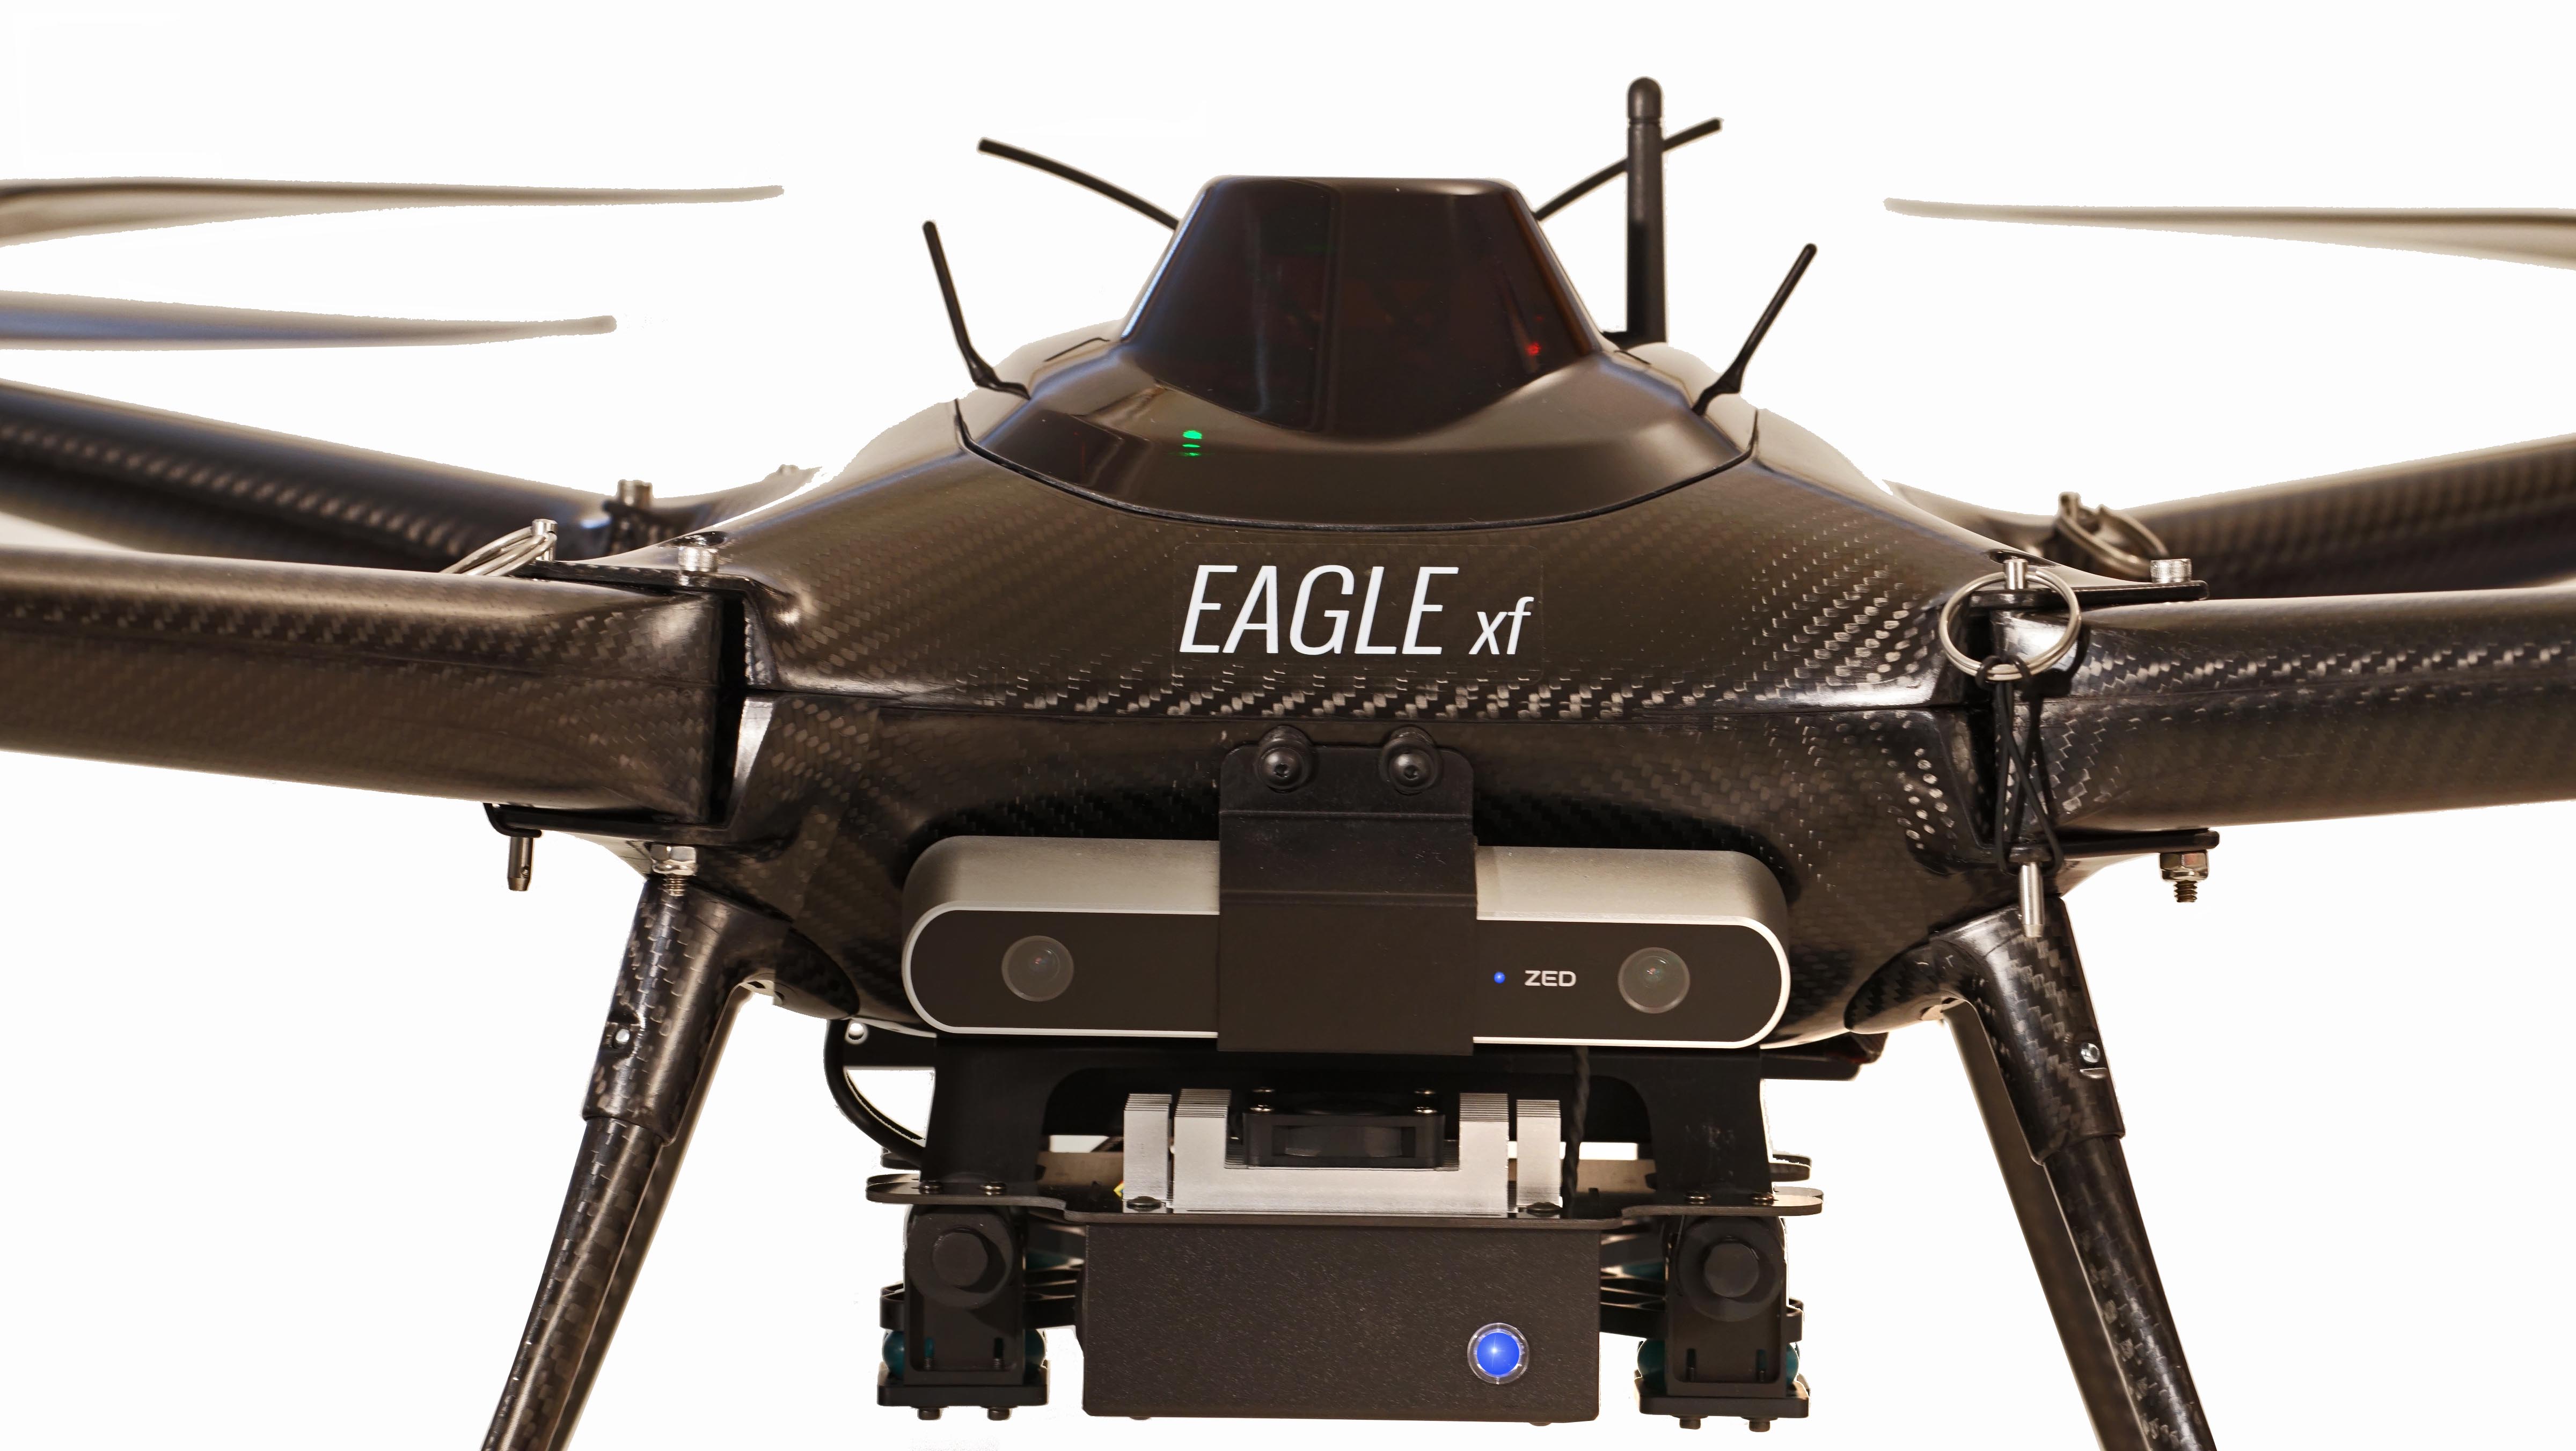 UAVA Eagle XF Equipped with Sense and Avoid System